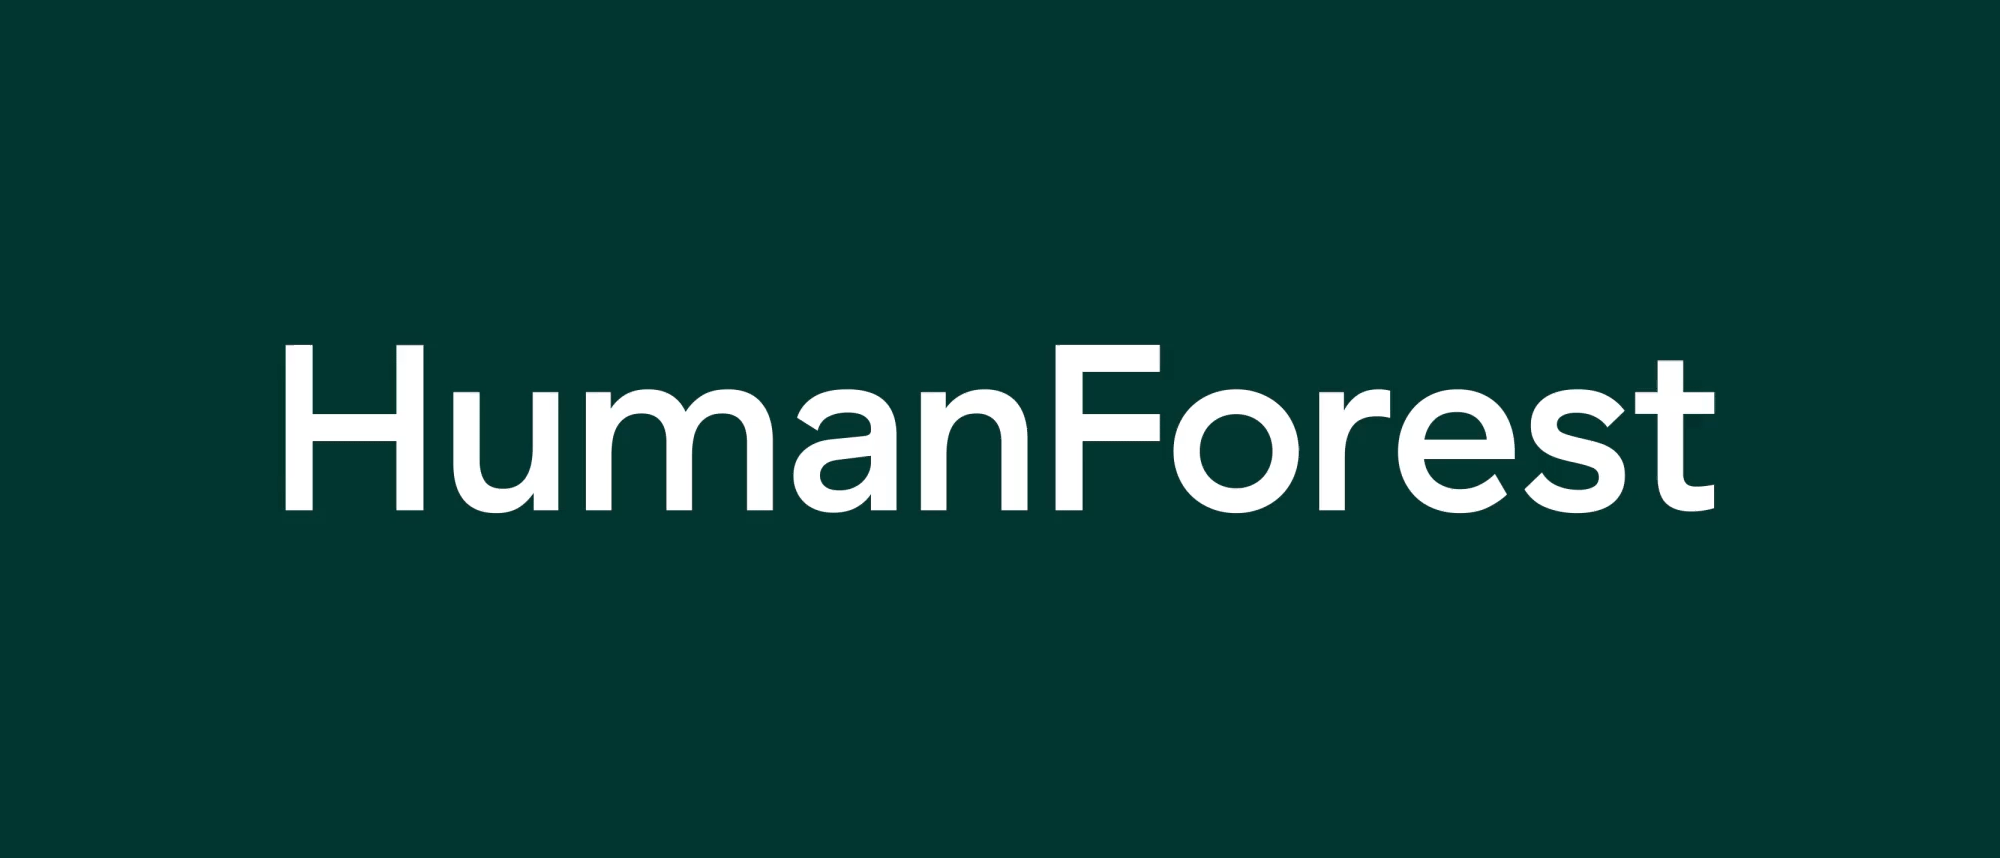 New Logo and Identity for HumanForest by South